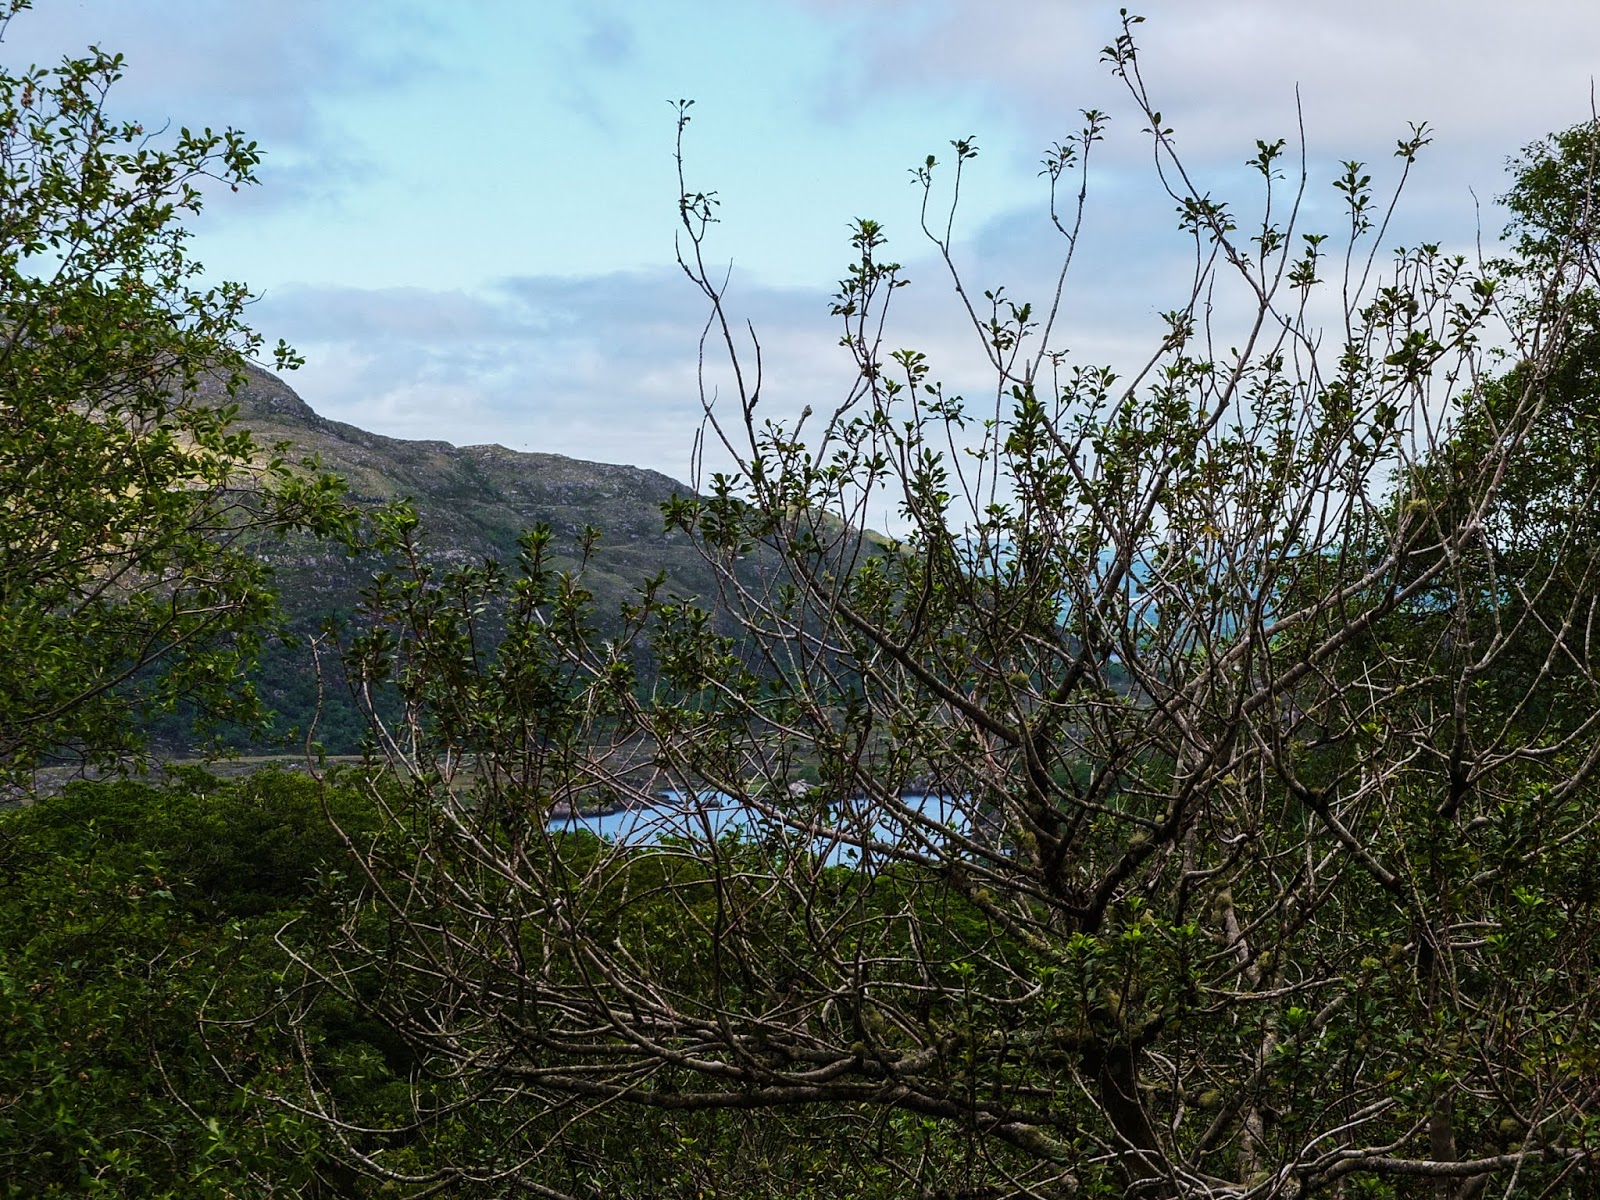 View of Kenmare Bay from Moll's Gap obstructed by a tree lined hedge.